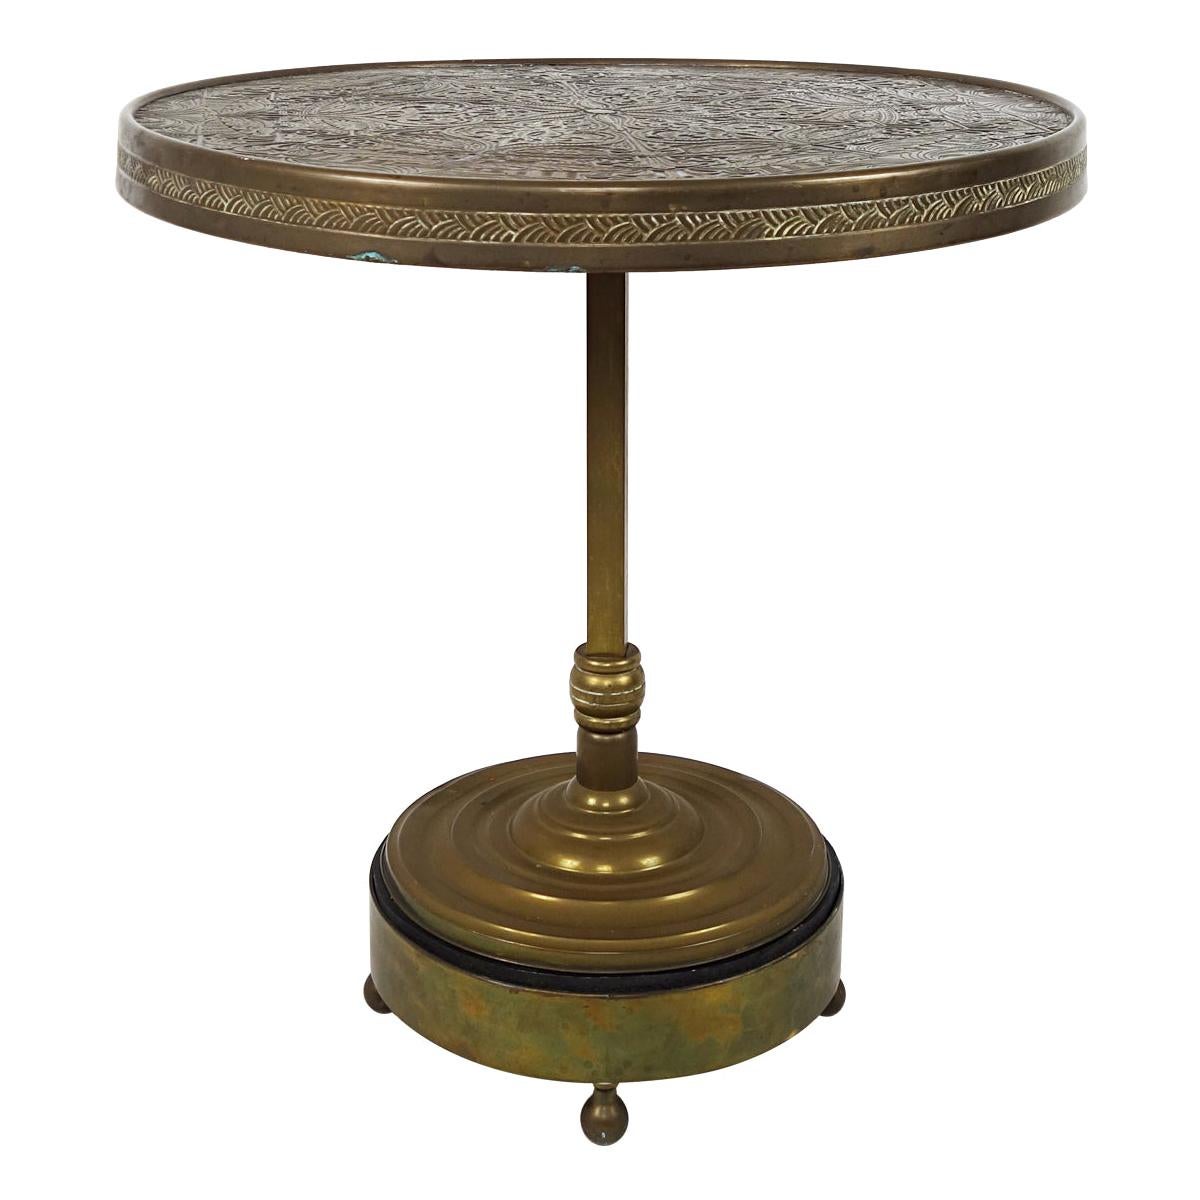 Antique Moroccan Occasional Table with Hammered and Engraved Copper Top